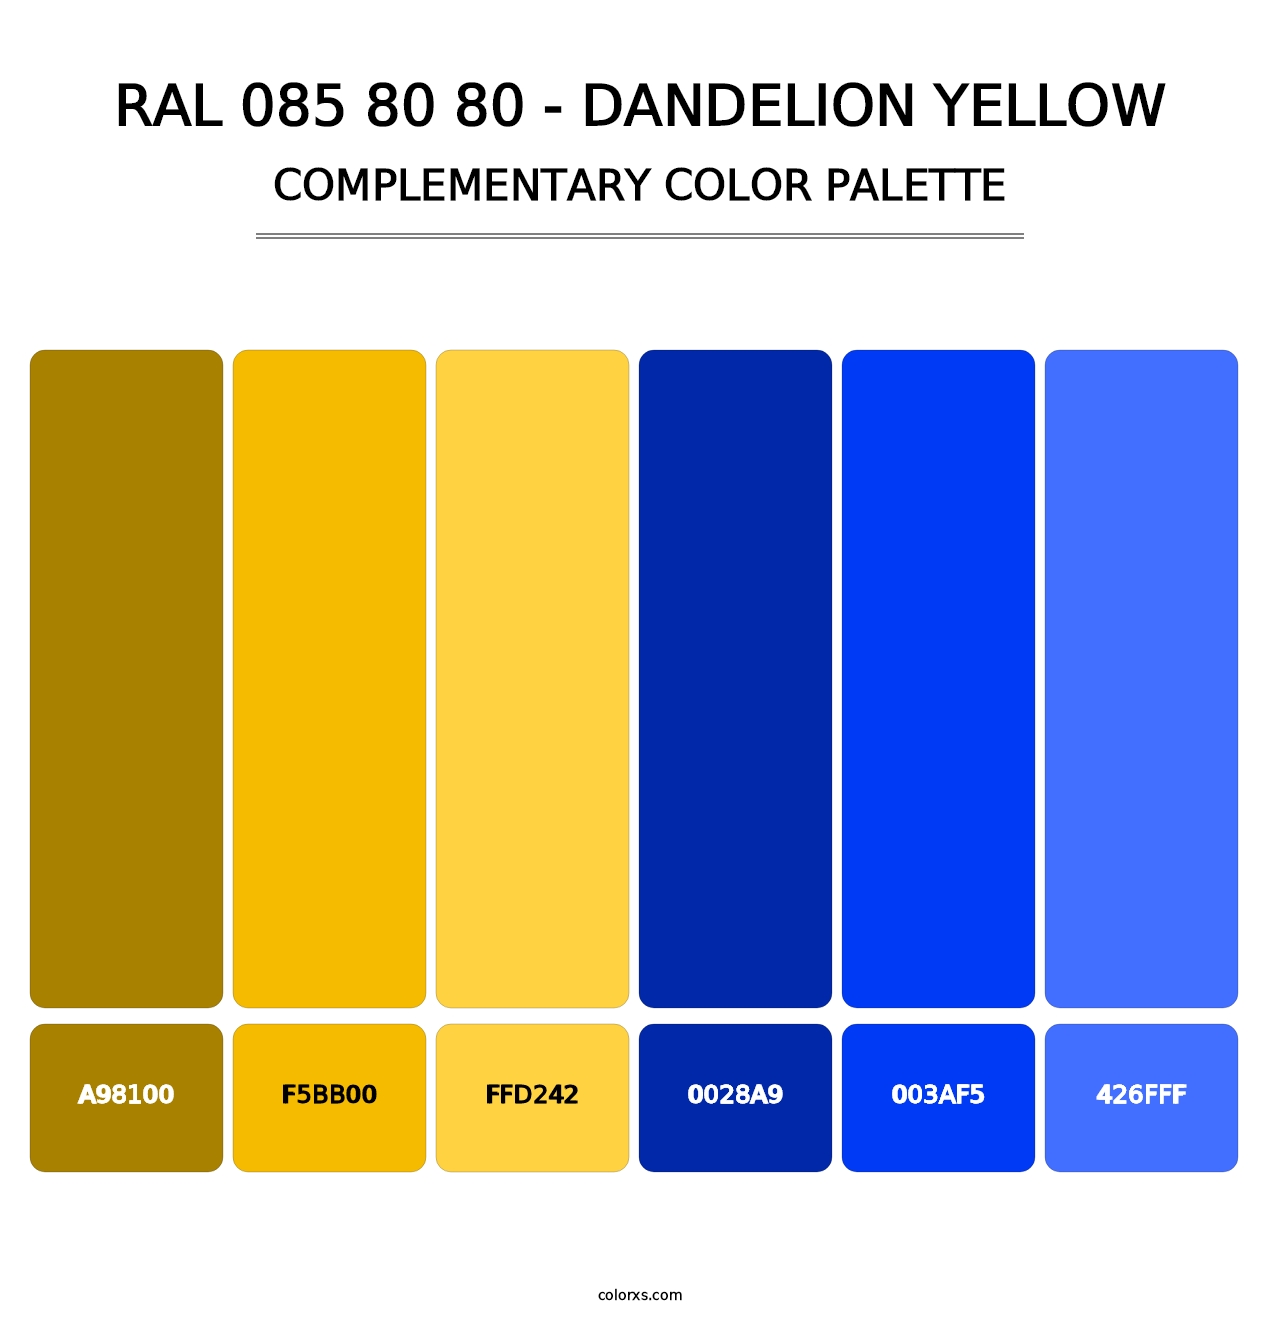 RAL 085 80 80 - Dandelion Yellow - Complementary Color Palette